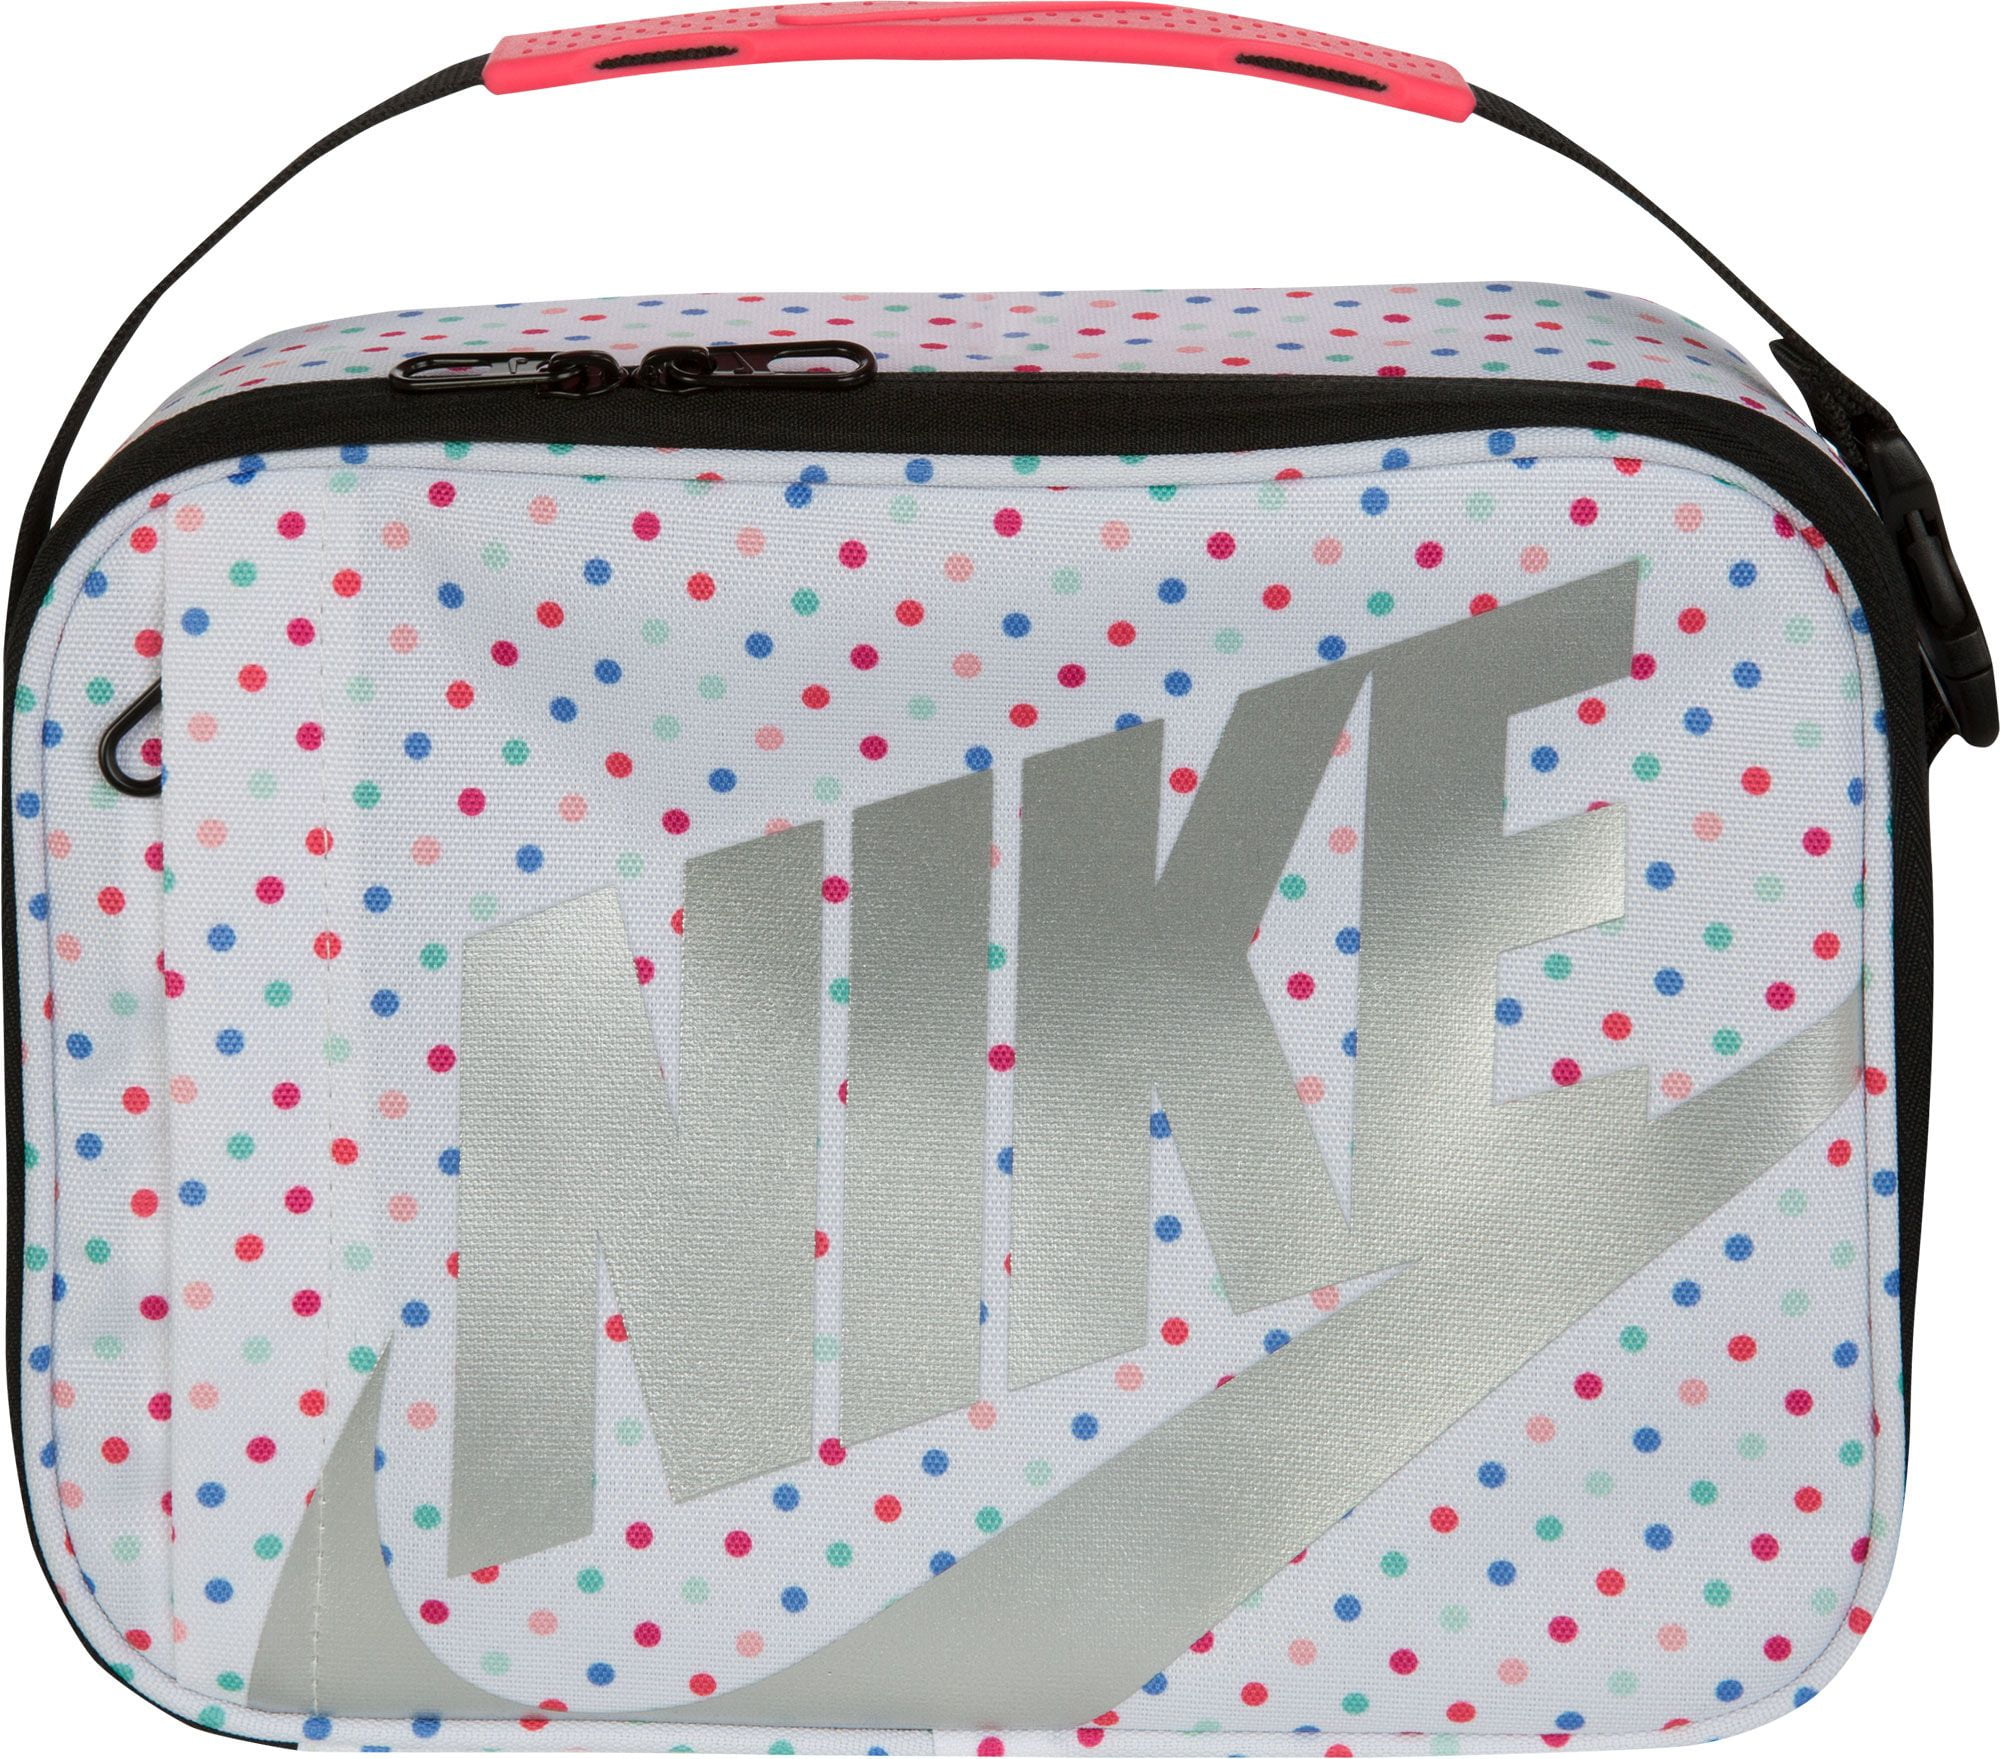 Nike Futura Fuel Pack Lunch Tote 